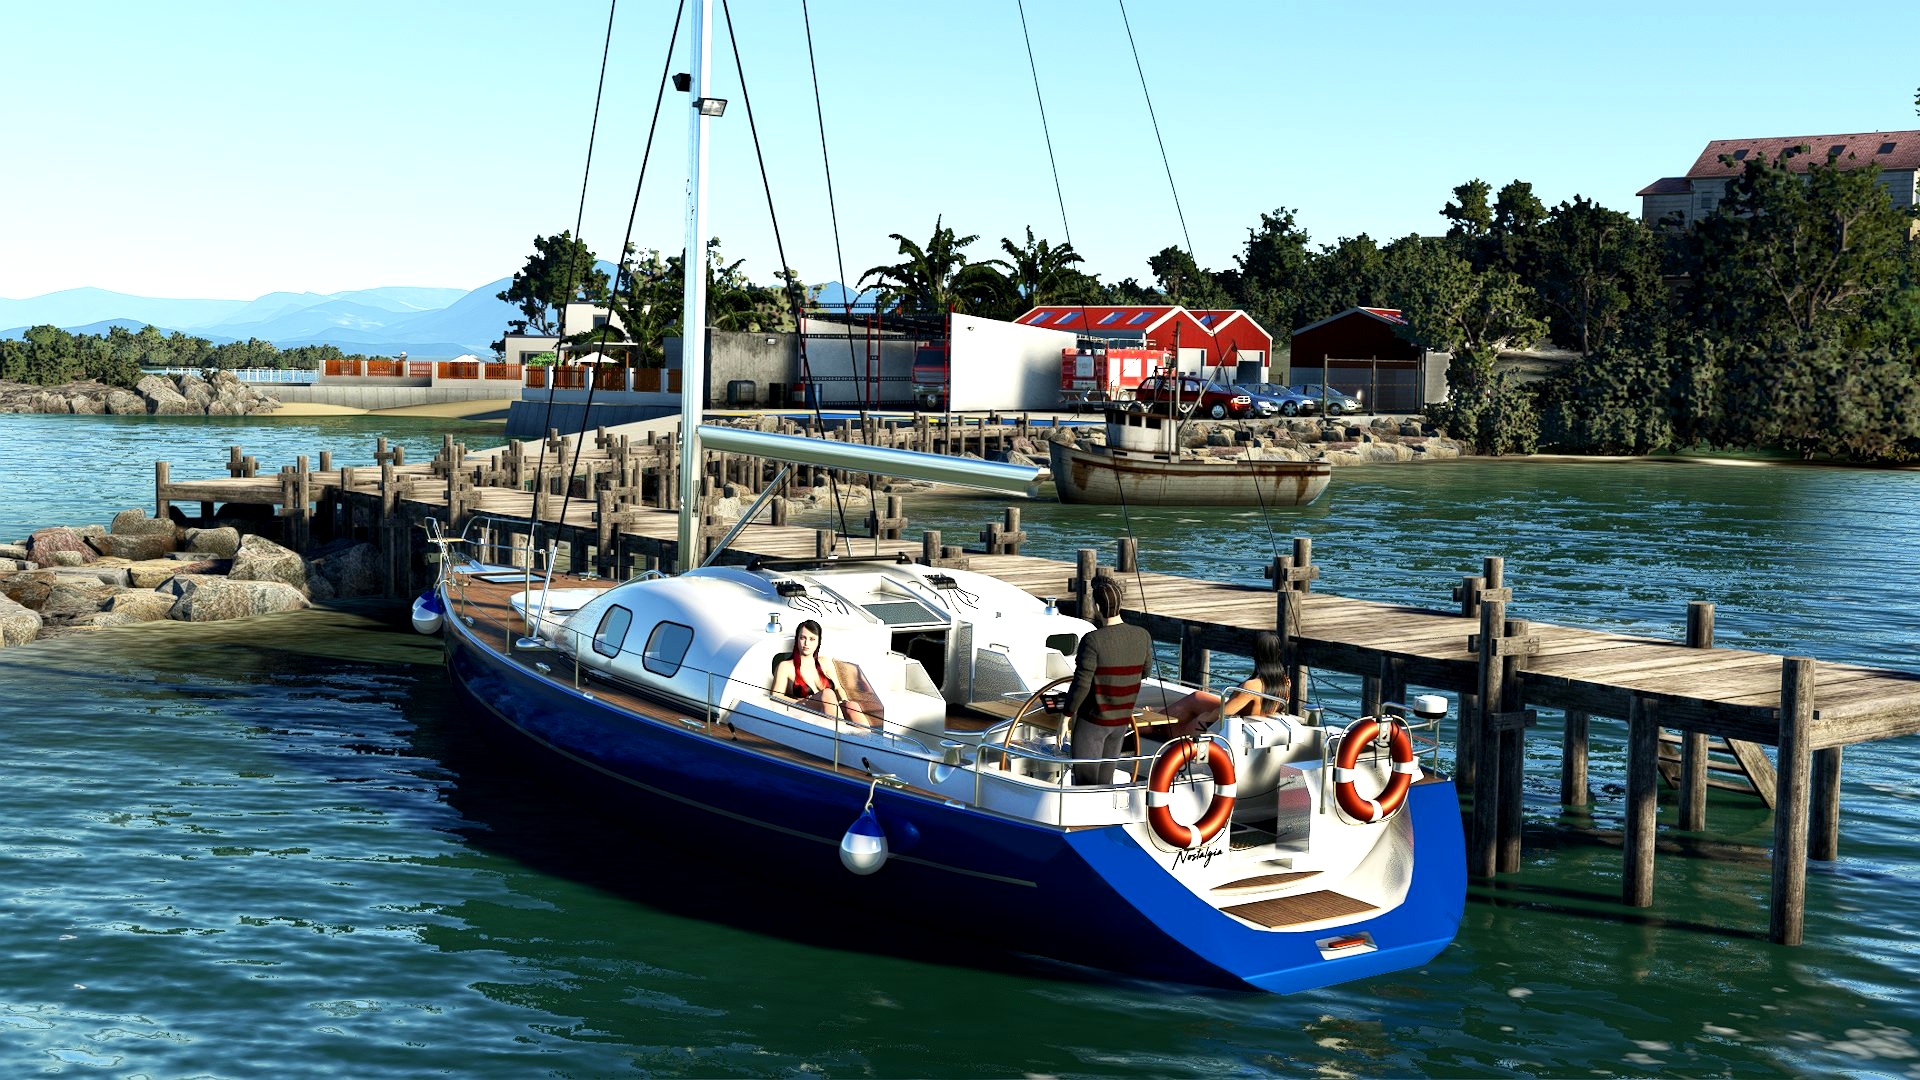 https://pcdn.flightsim.to/images/24/yatch-and-sailboat-pack-5-boats-ifNCV.jpg?auto_optimize=low&amp;width=2056